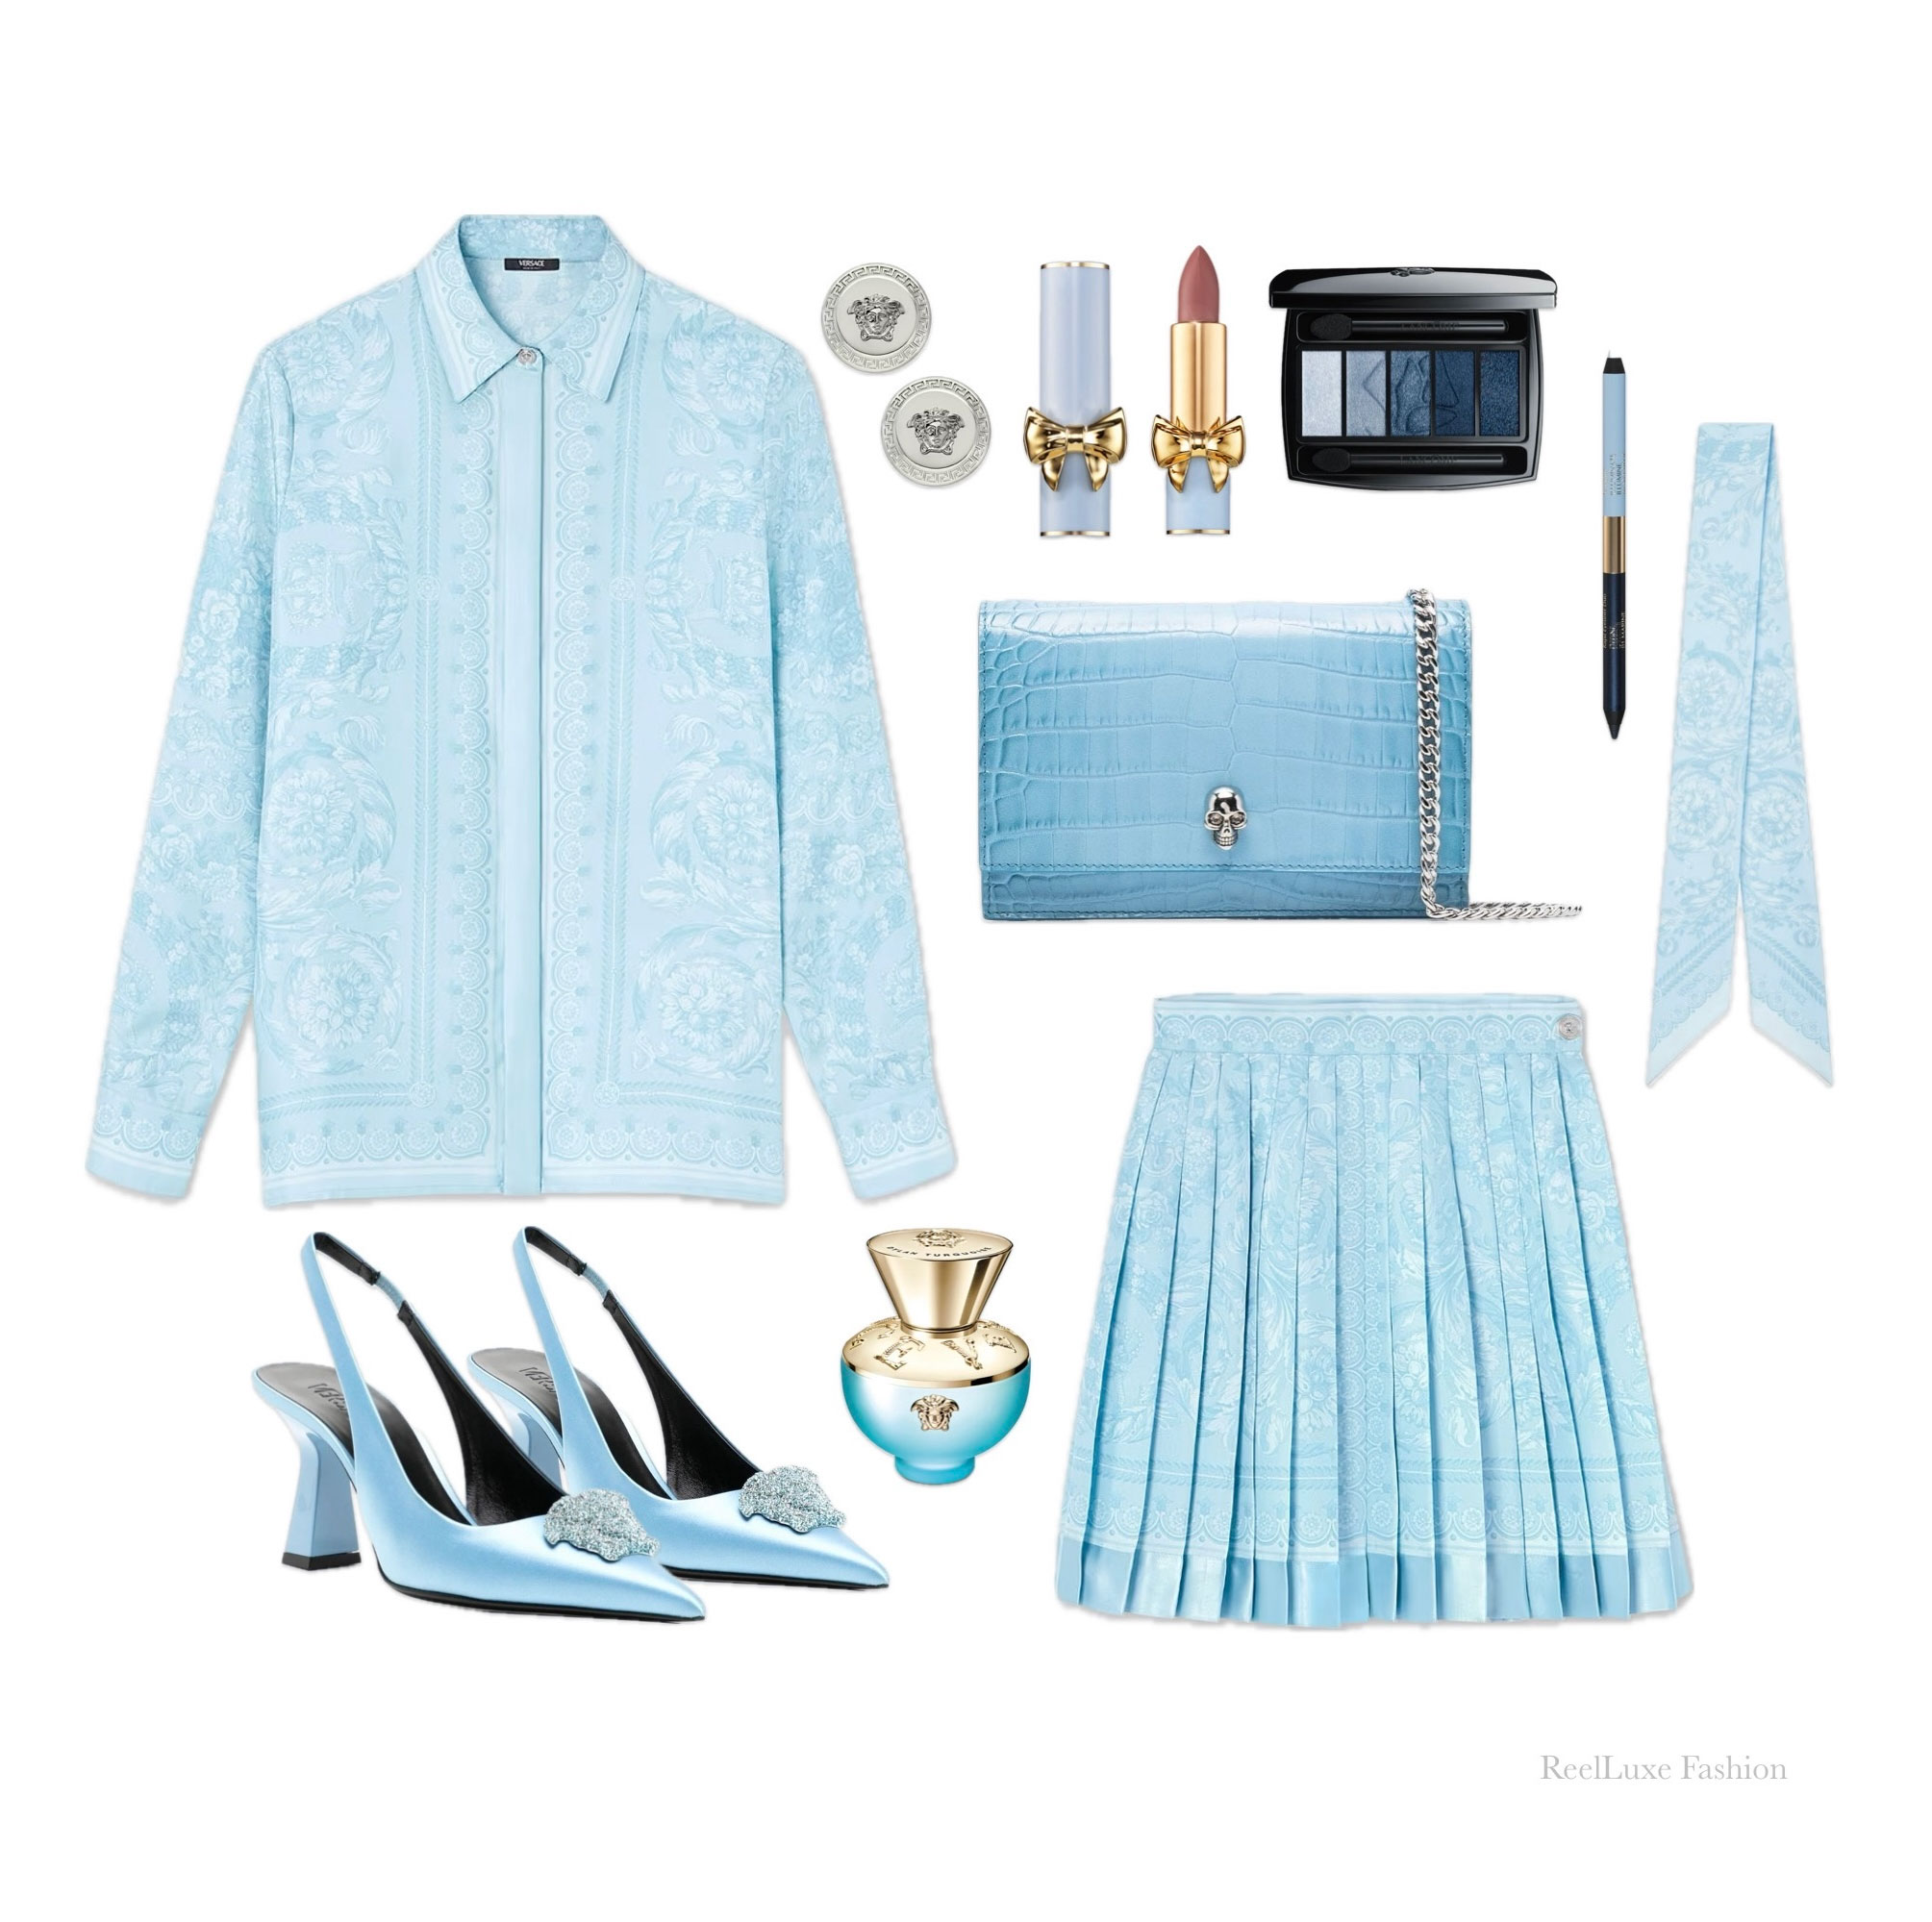 New Season Collection by Versace: Blue Versace Outfit from Versace Firenze Boutique, with Alexander McQueen Bag, Plus Beauty Products